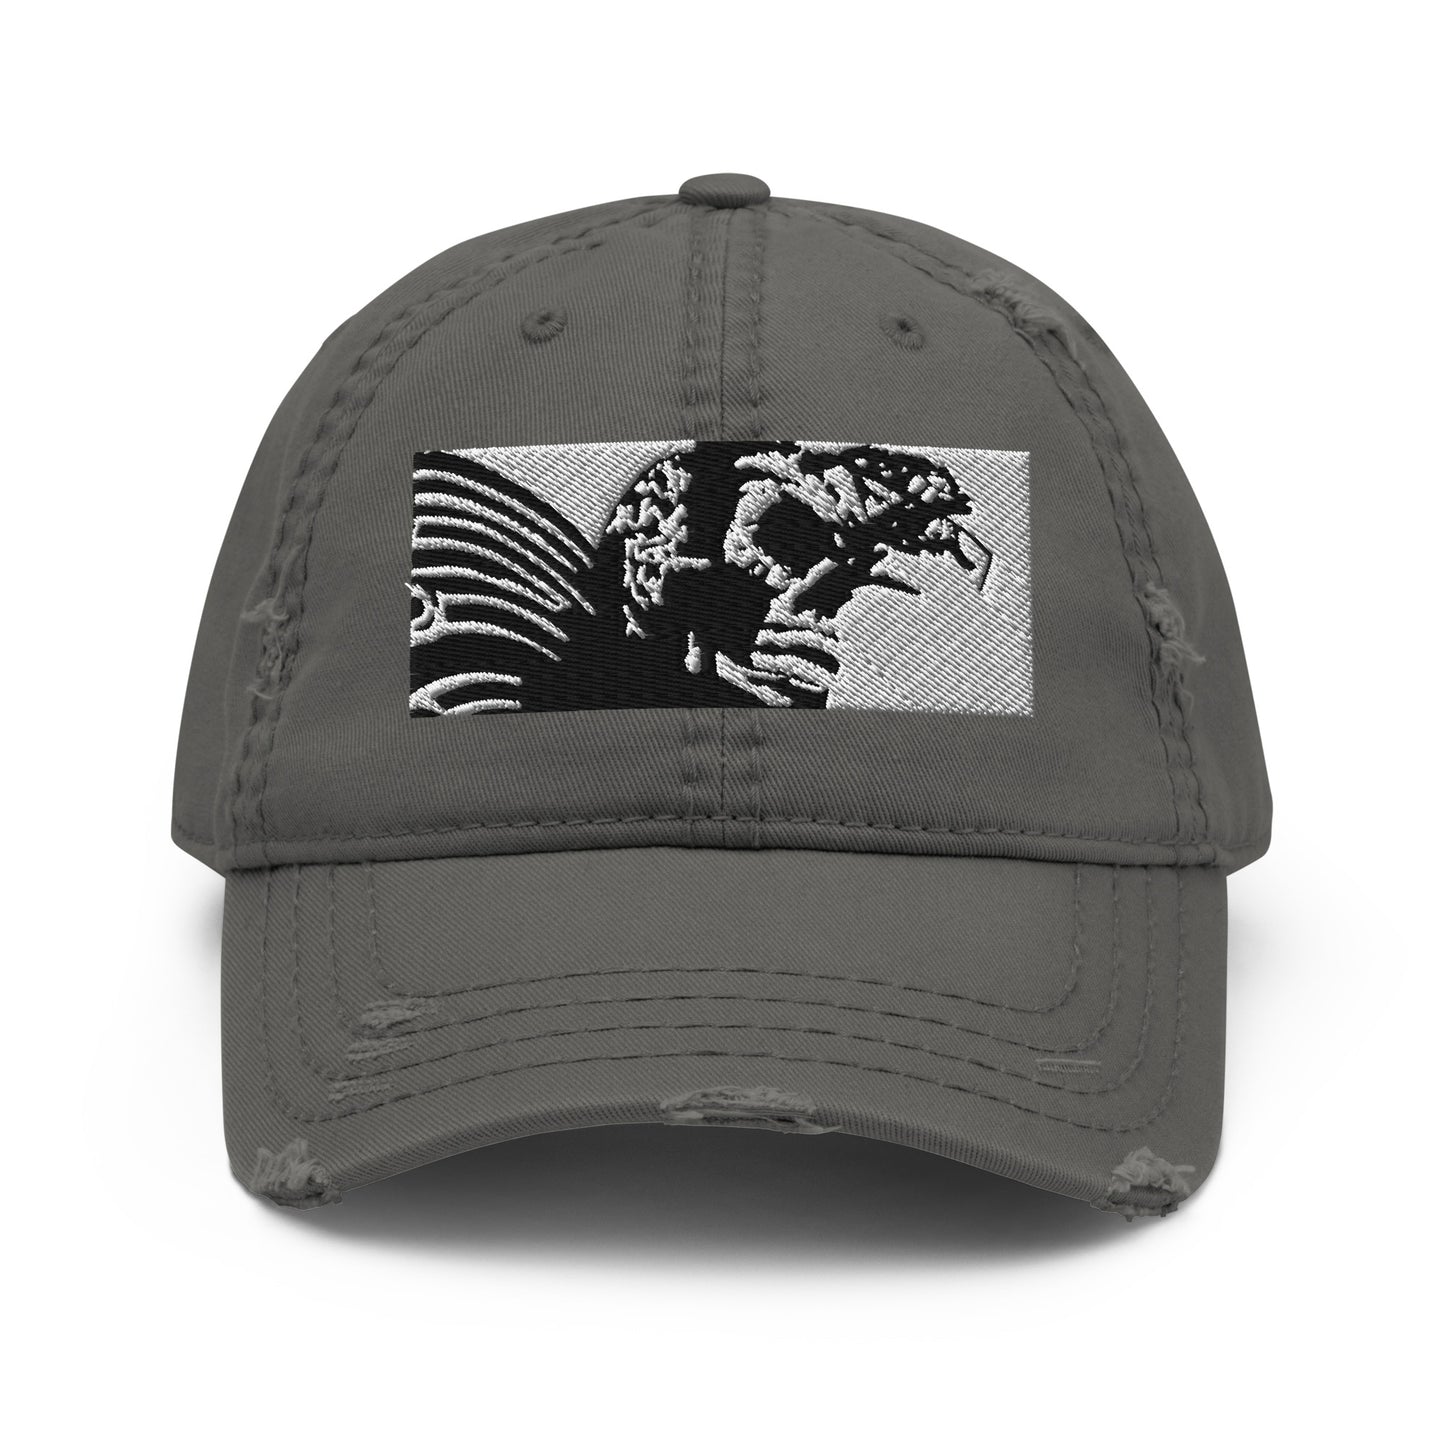 Skull Warrior - (Black & White) - Distressed Dad Hat - Fry1Productions